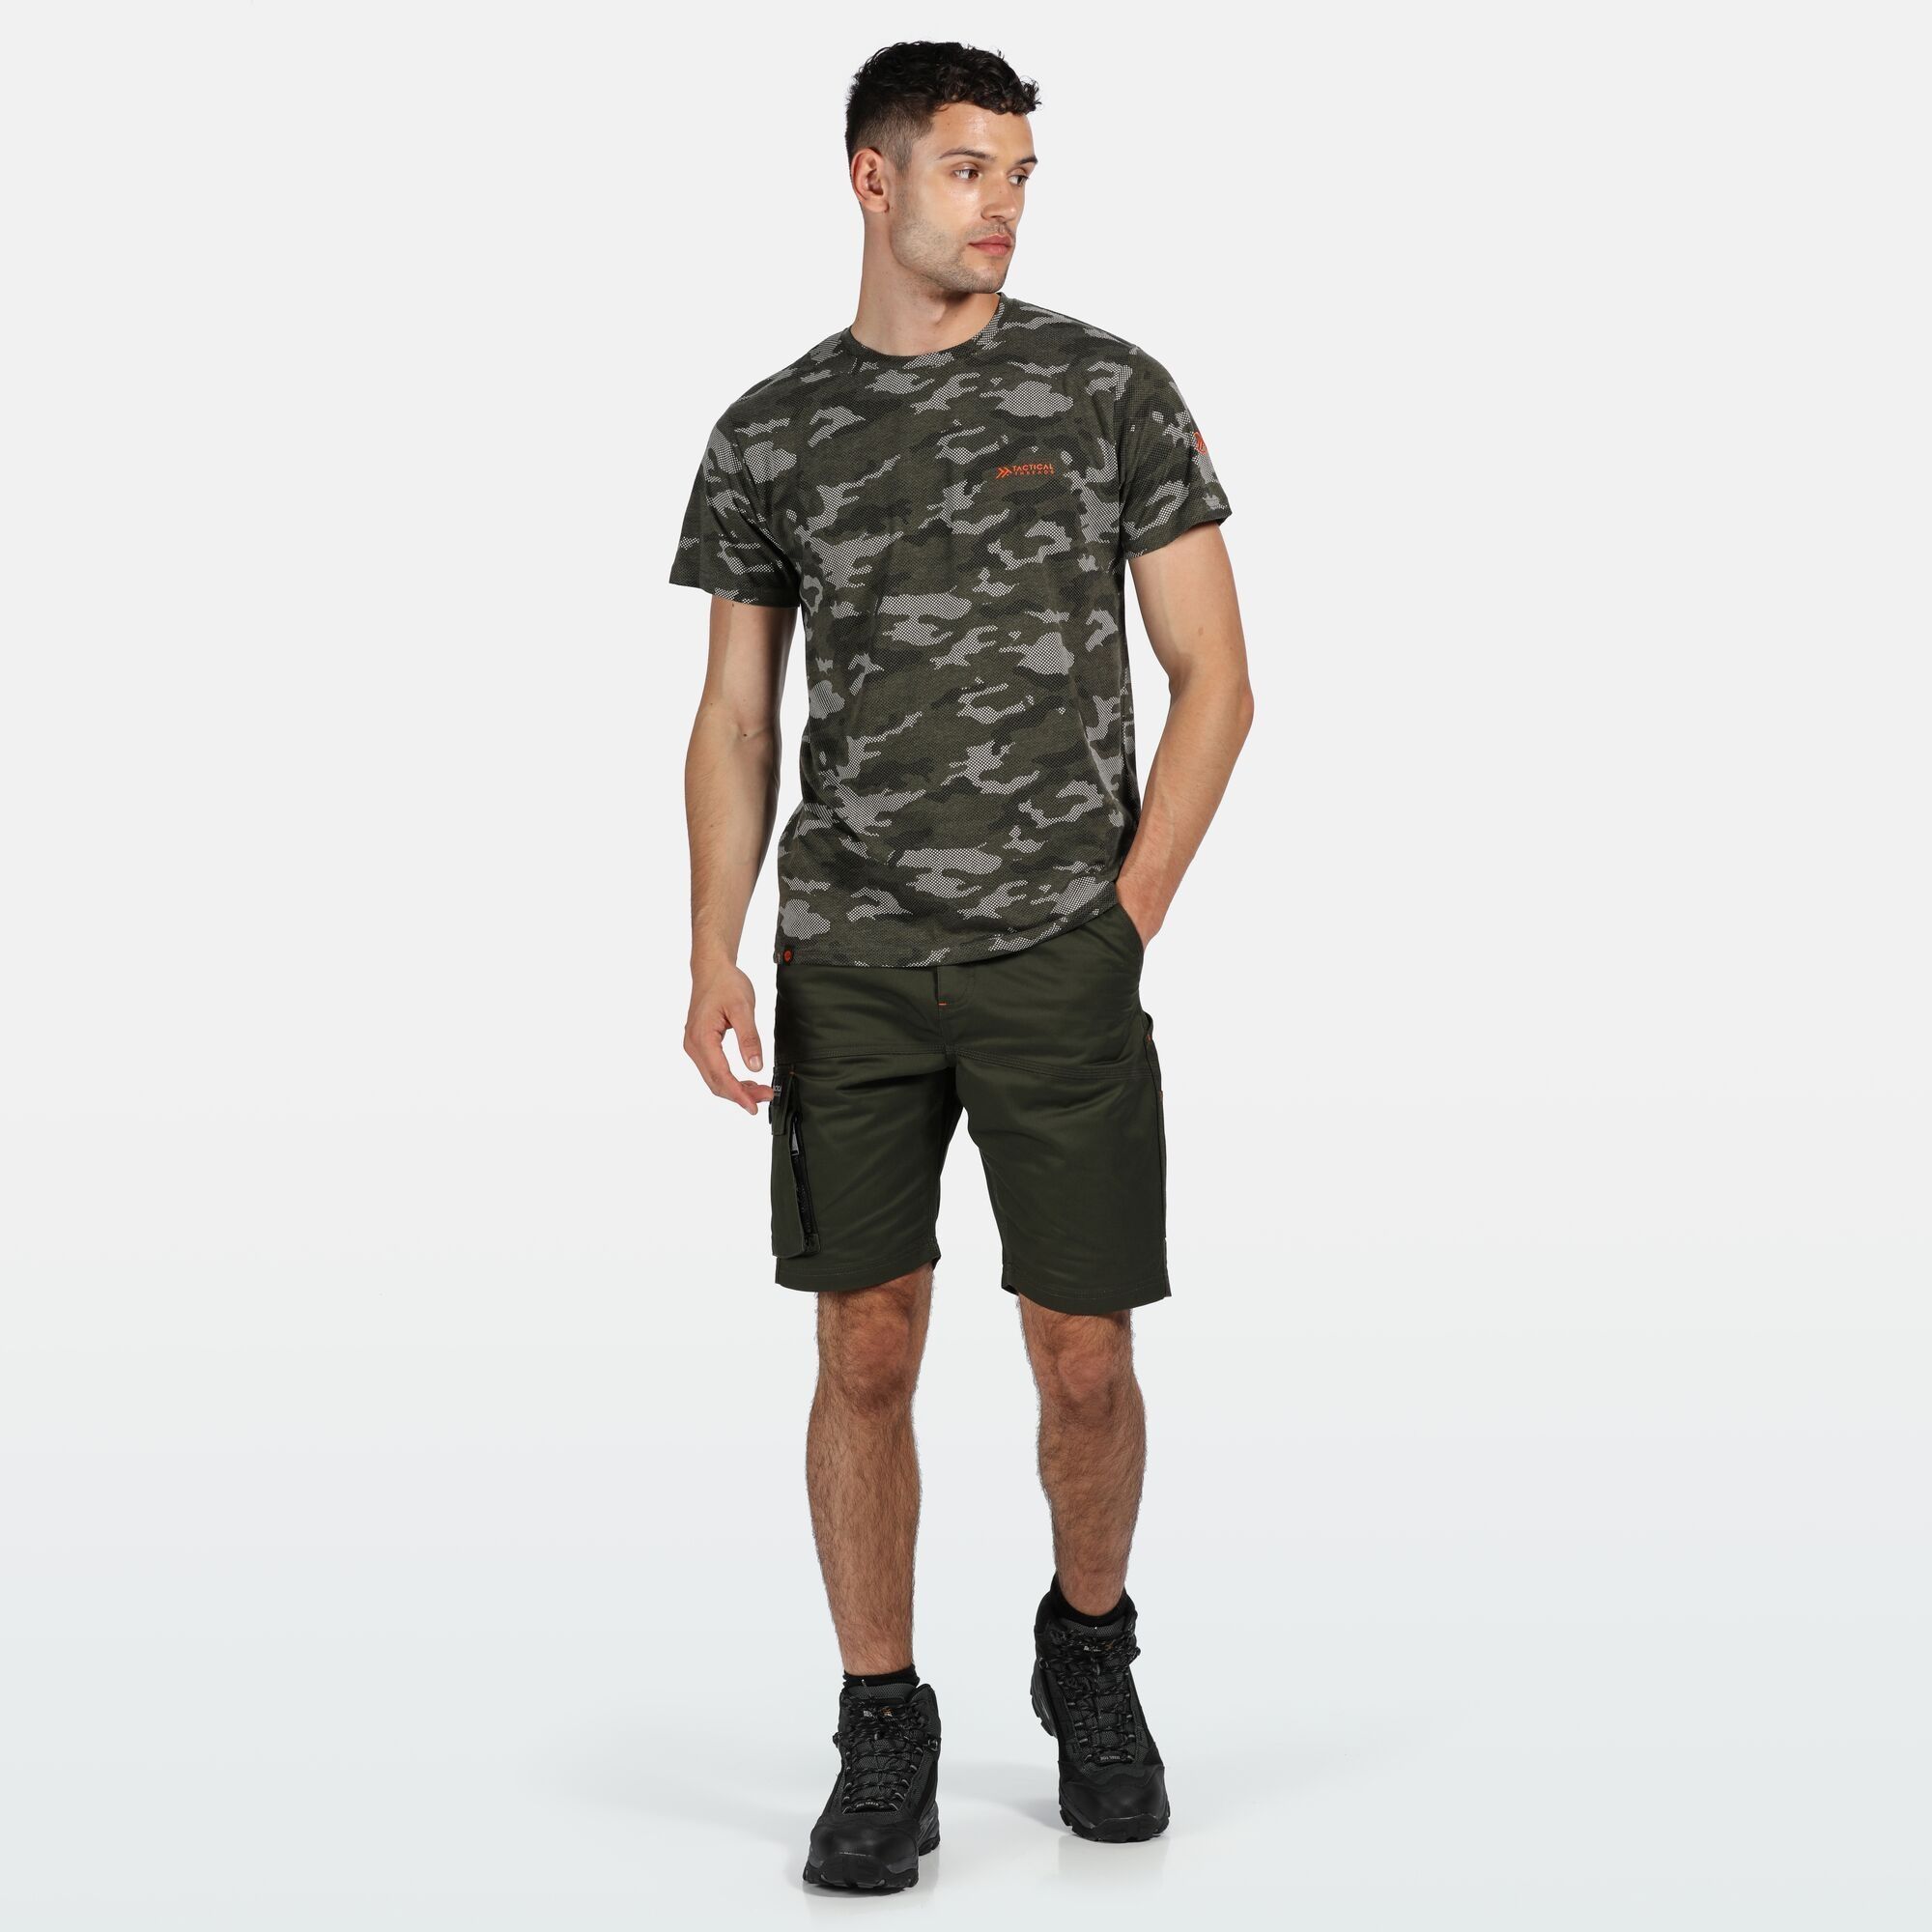 60% cotton, 40% polyester. Marl single jersey fabric. All over camouflage print. Part of the Tactical Threads range.